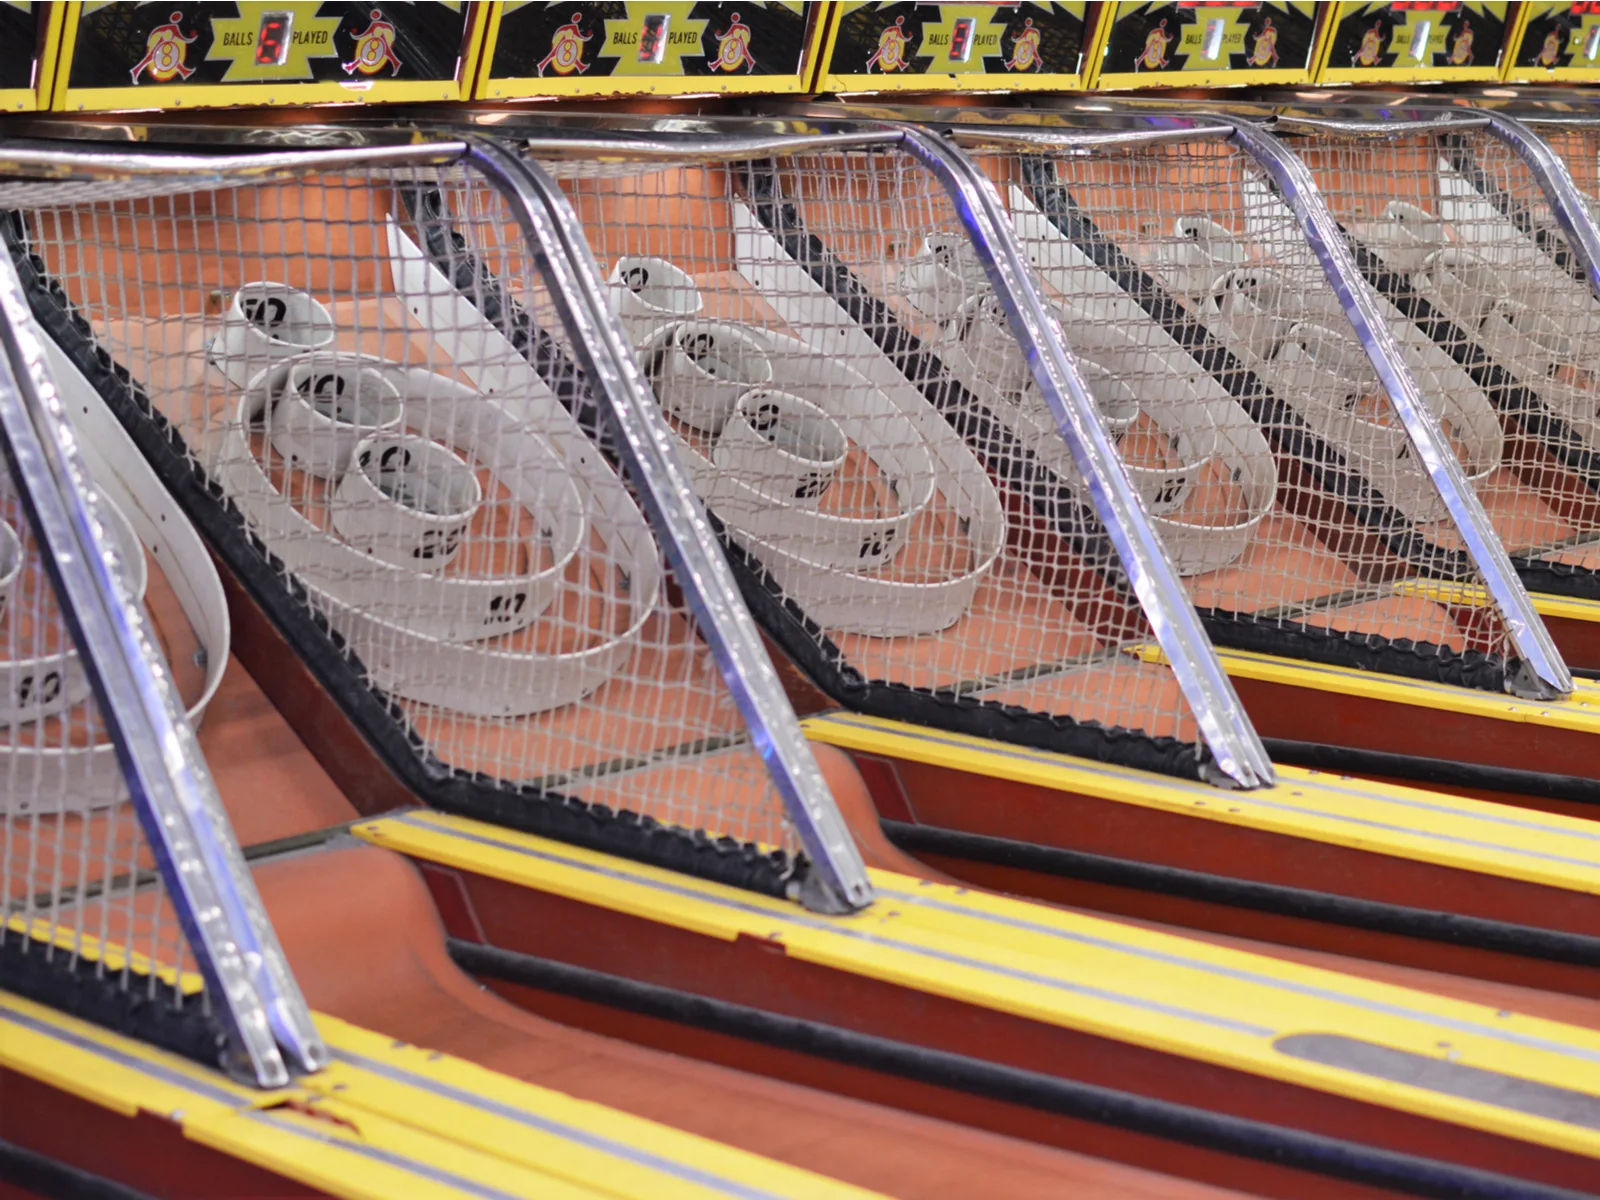 Skee ball at Skyline Park, one of the best things to do in Atlanta